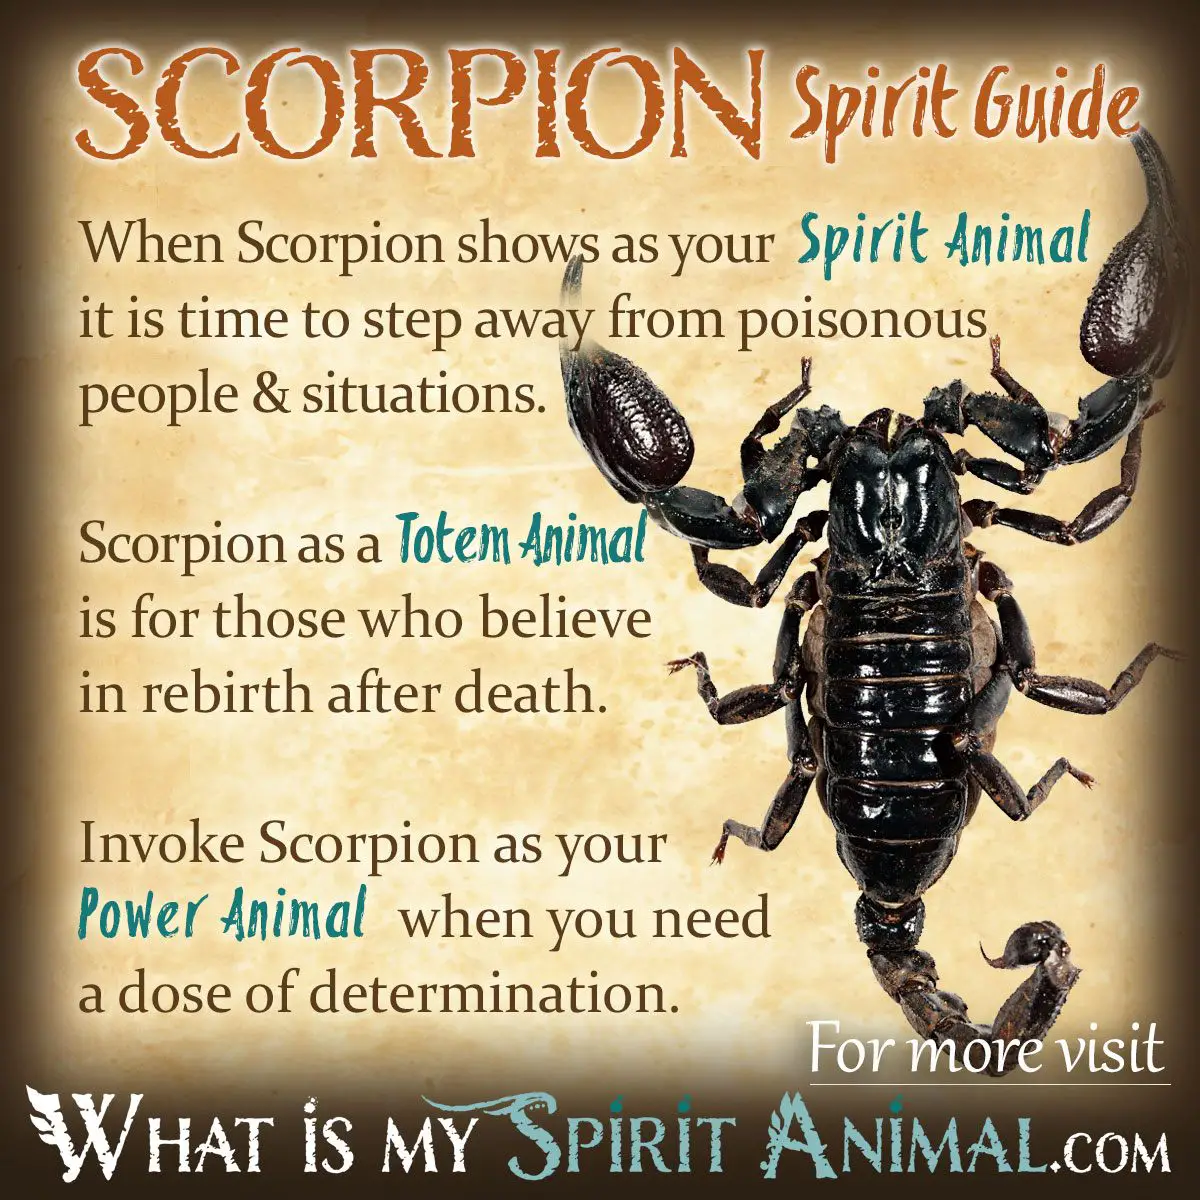 What Does A Scorpion Symbolize In Dreams?